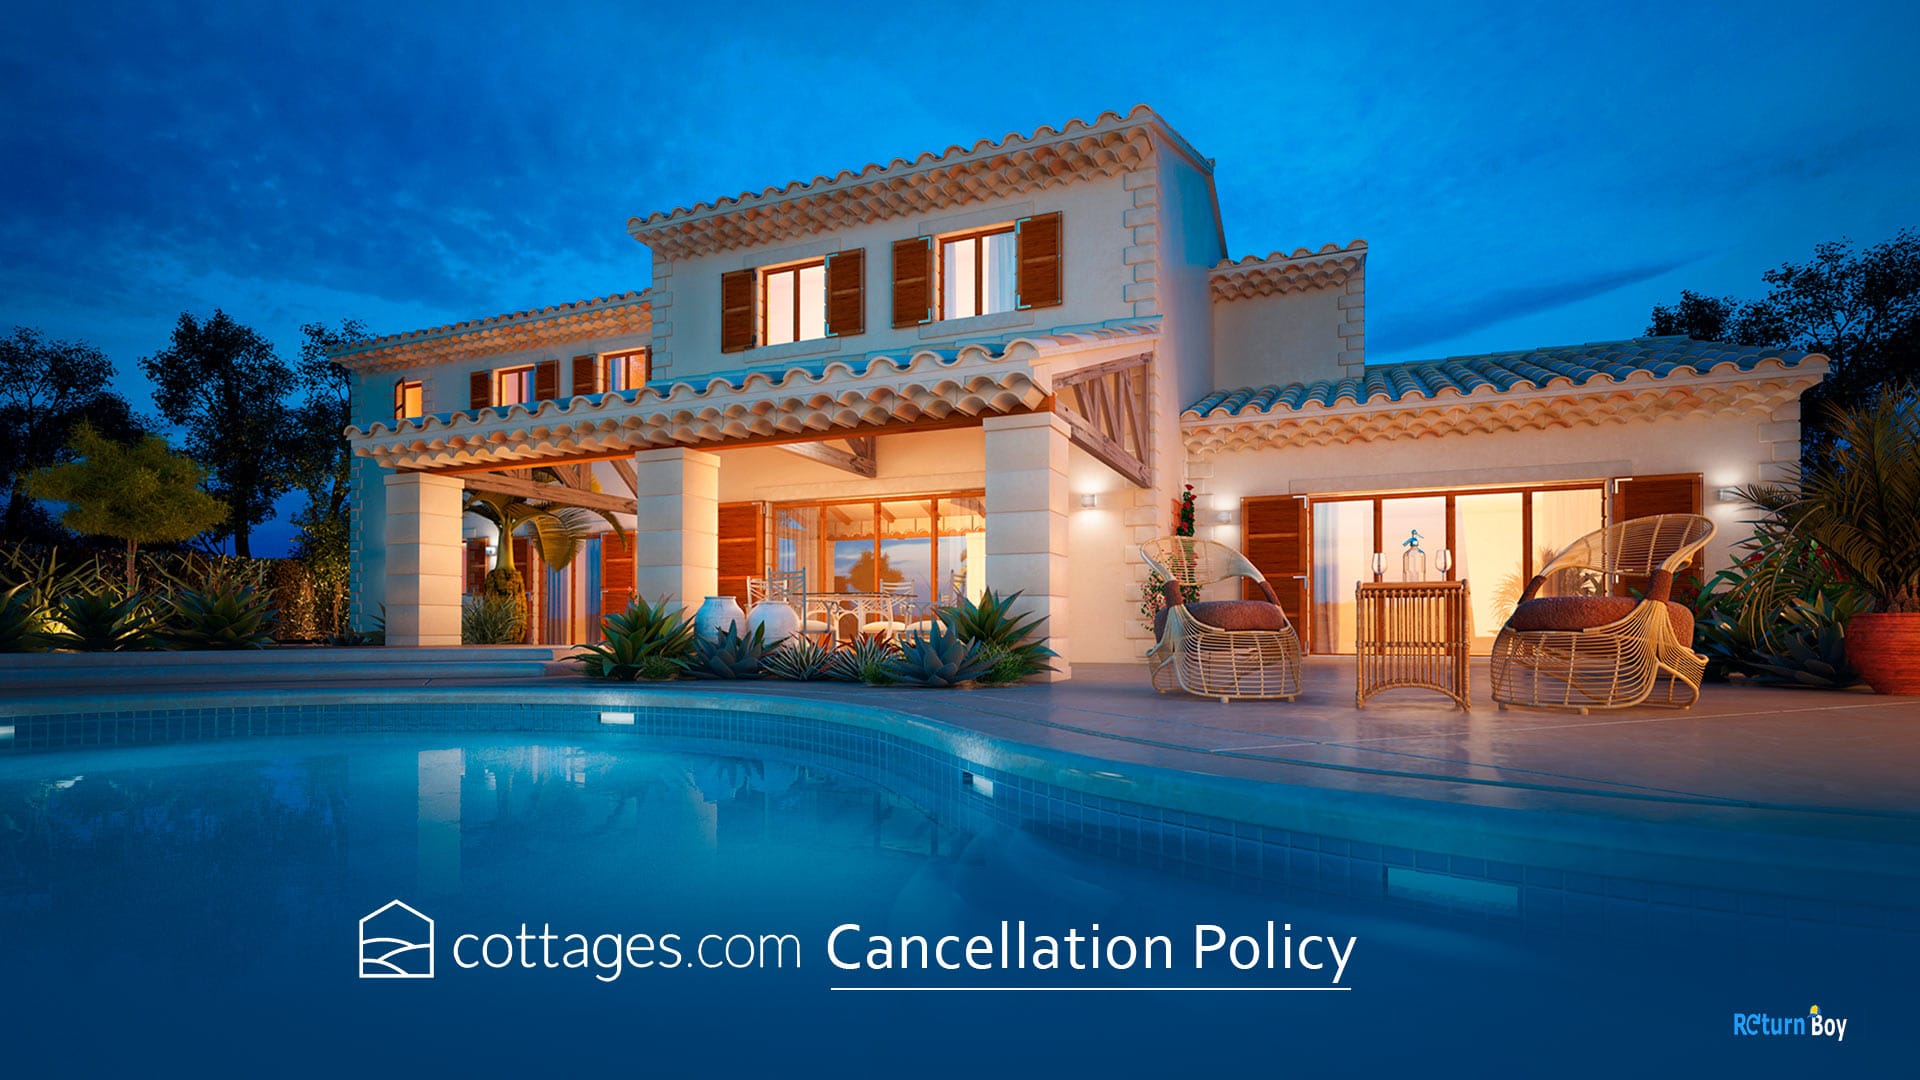 Cottages.com Cancellation Policy